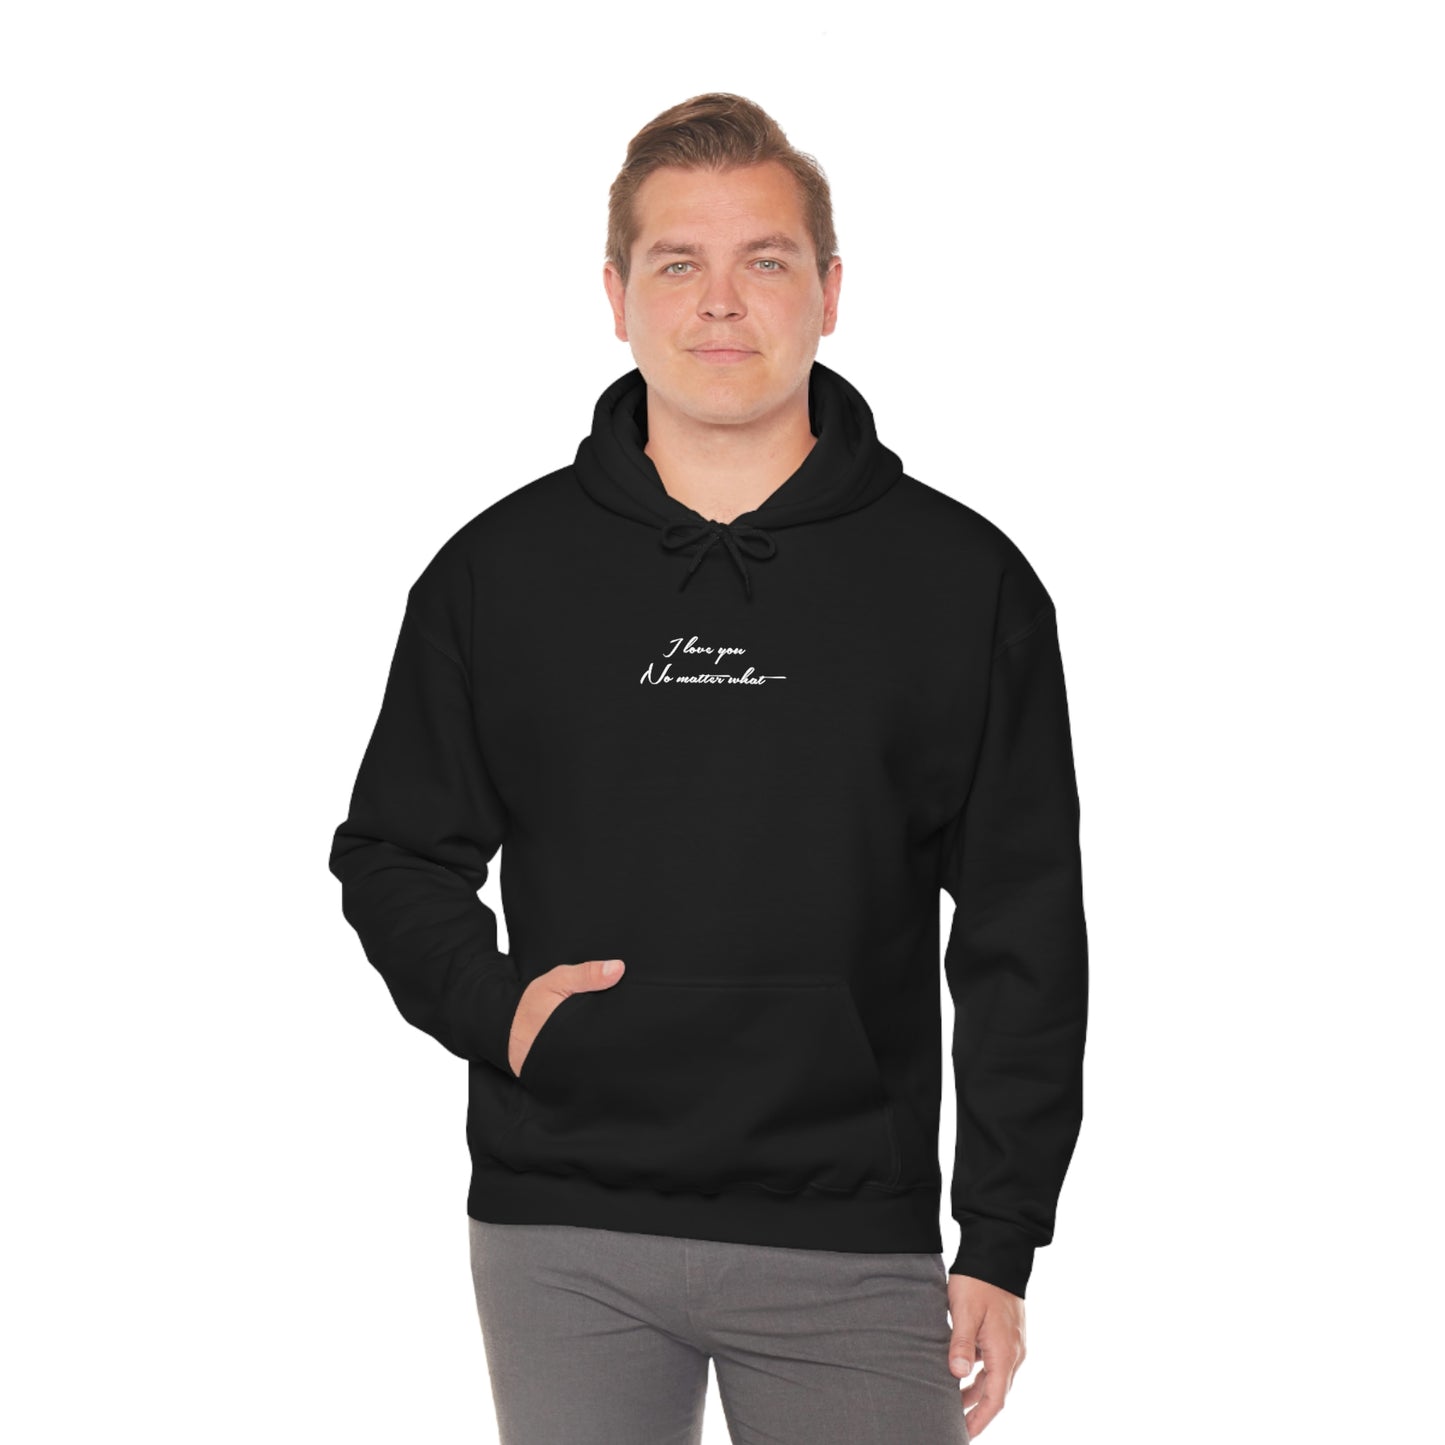 "YOU ARE LOVED" Hooded Sweatshirt